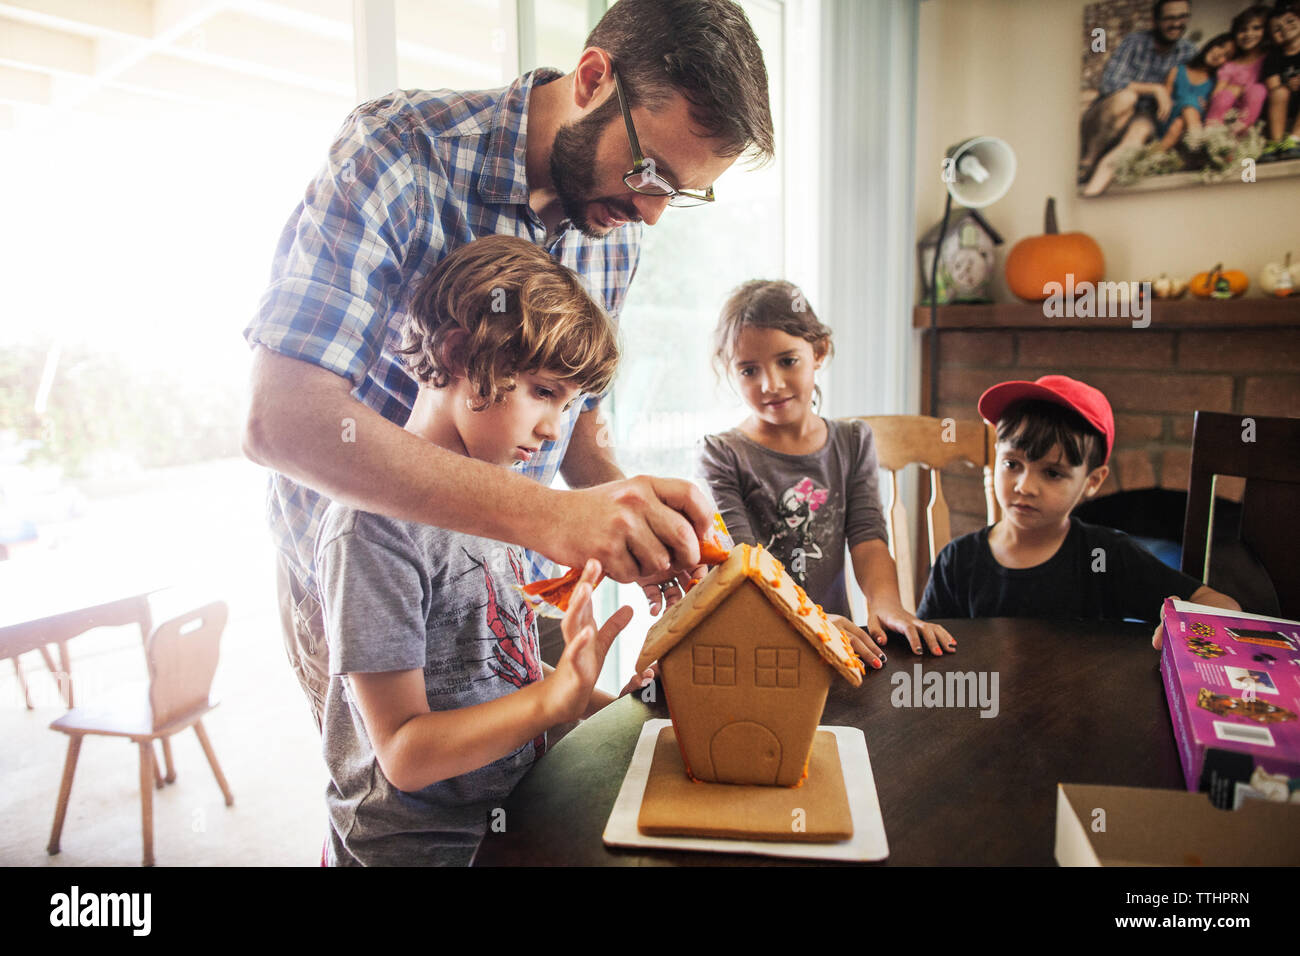 Family decorating gingerbread house at home Stock Photo